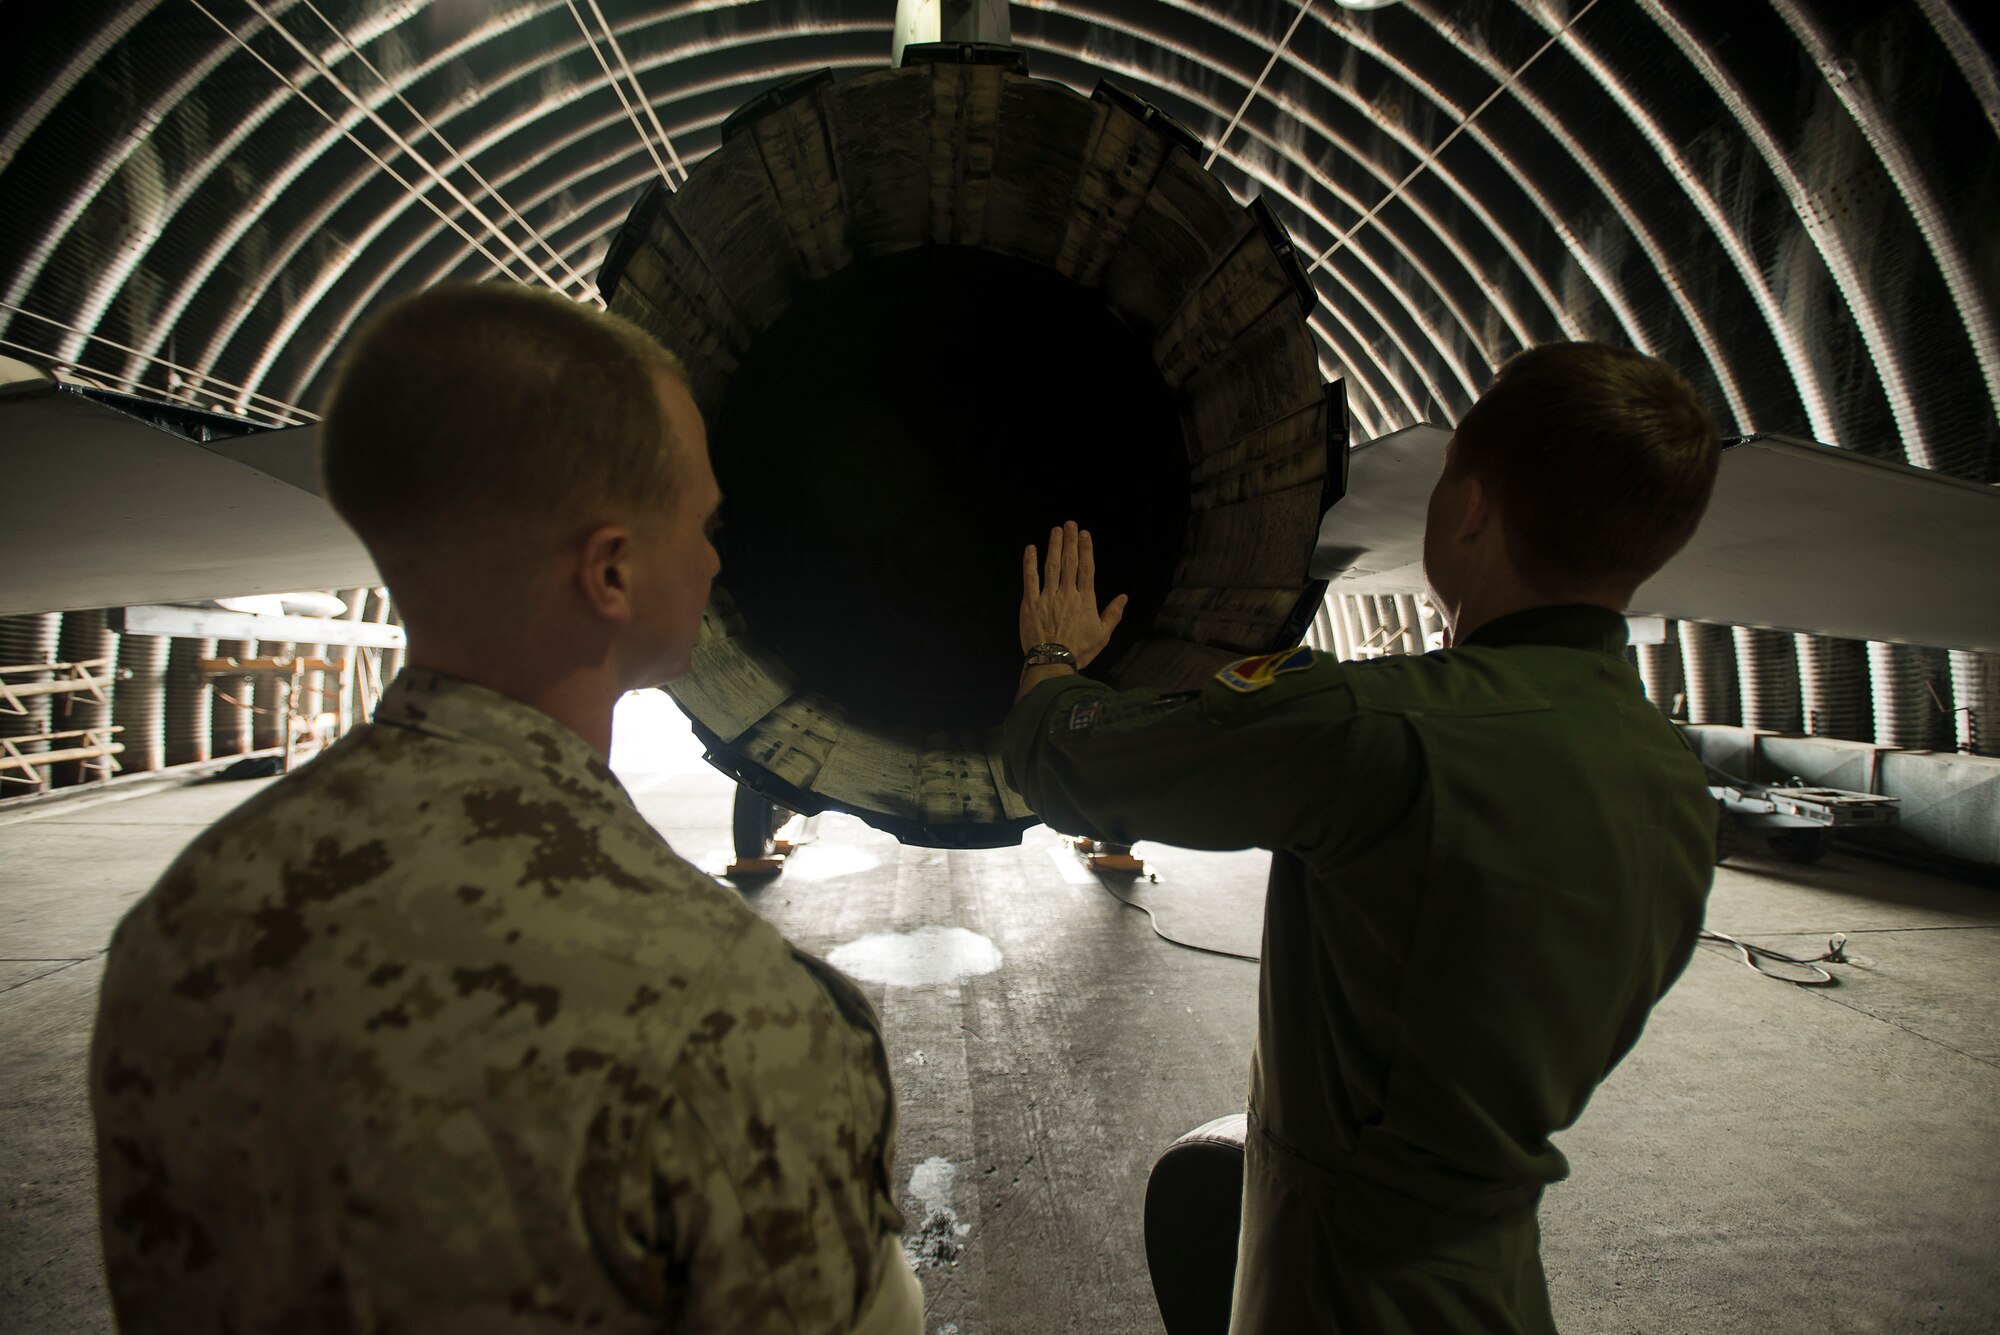 Cpl. Jake Balcom is shown the exhaust end of an F-16 Fighting Falcon by Capt. Jay Doerfler March 26, 2014, at Osan Air Base, Republic of Korea. Balcom spent two days touring his grandfather's old squadron, the 421st Fighter Squadron, which was deployed to Osan AB from Hill Air Force Base, Utah. Doerfler is the 421st Fighter Squadron chief of training. (U.S. Air Force photo/Staff Sgt. Jake Barreiro)